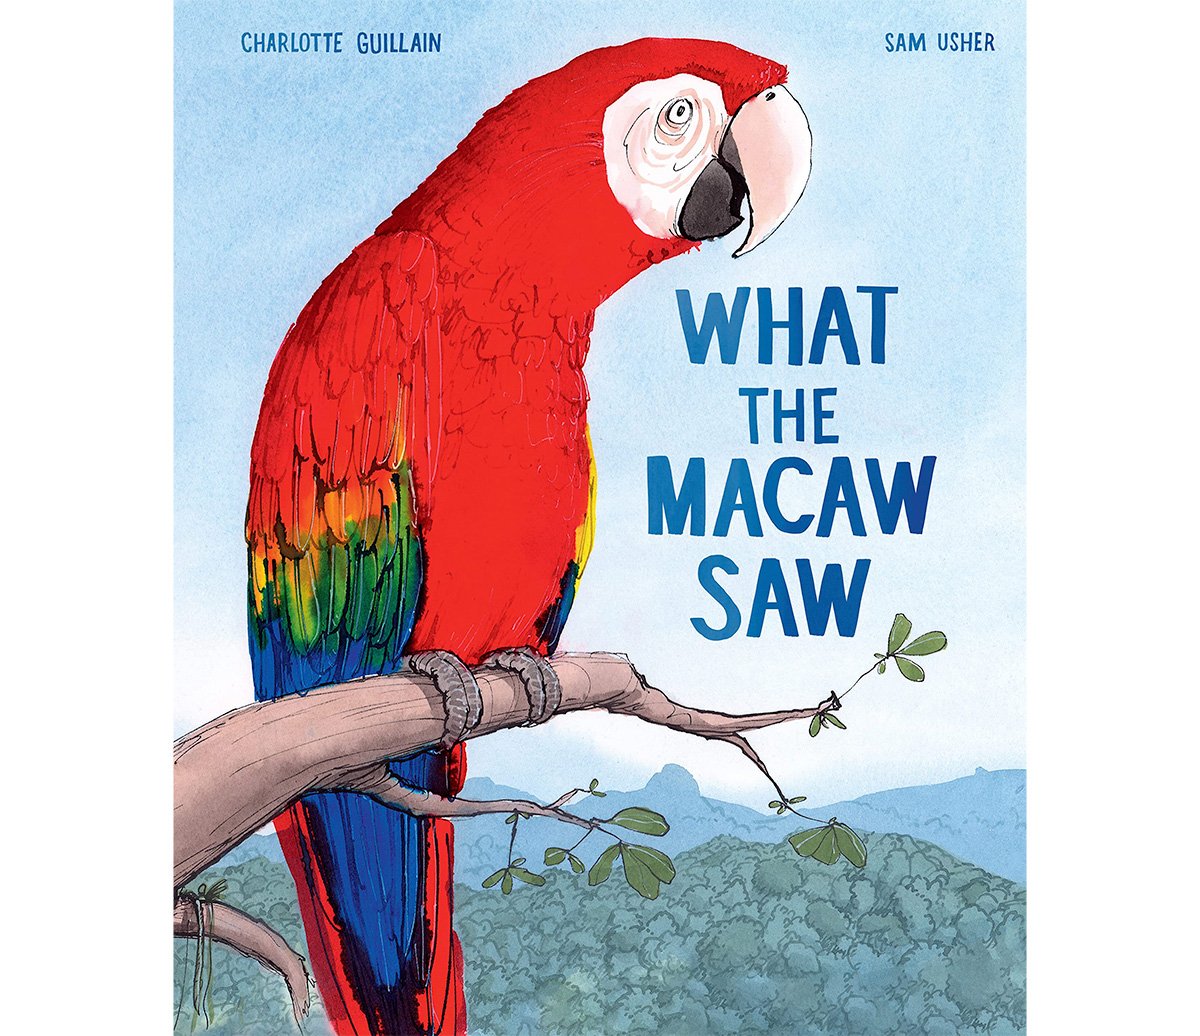 guillains-what-the-macaw-saw.jpg